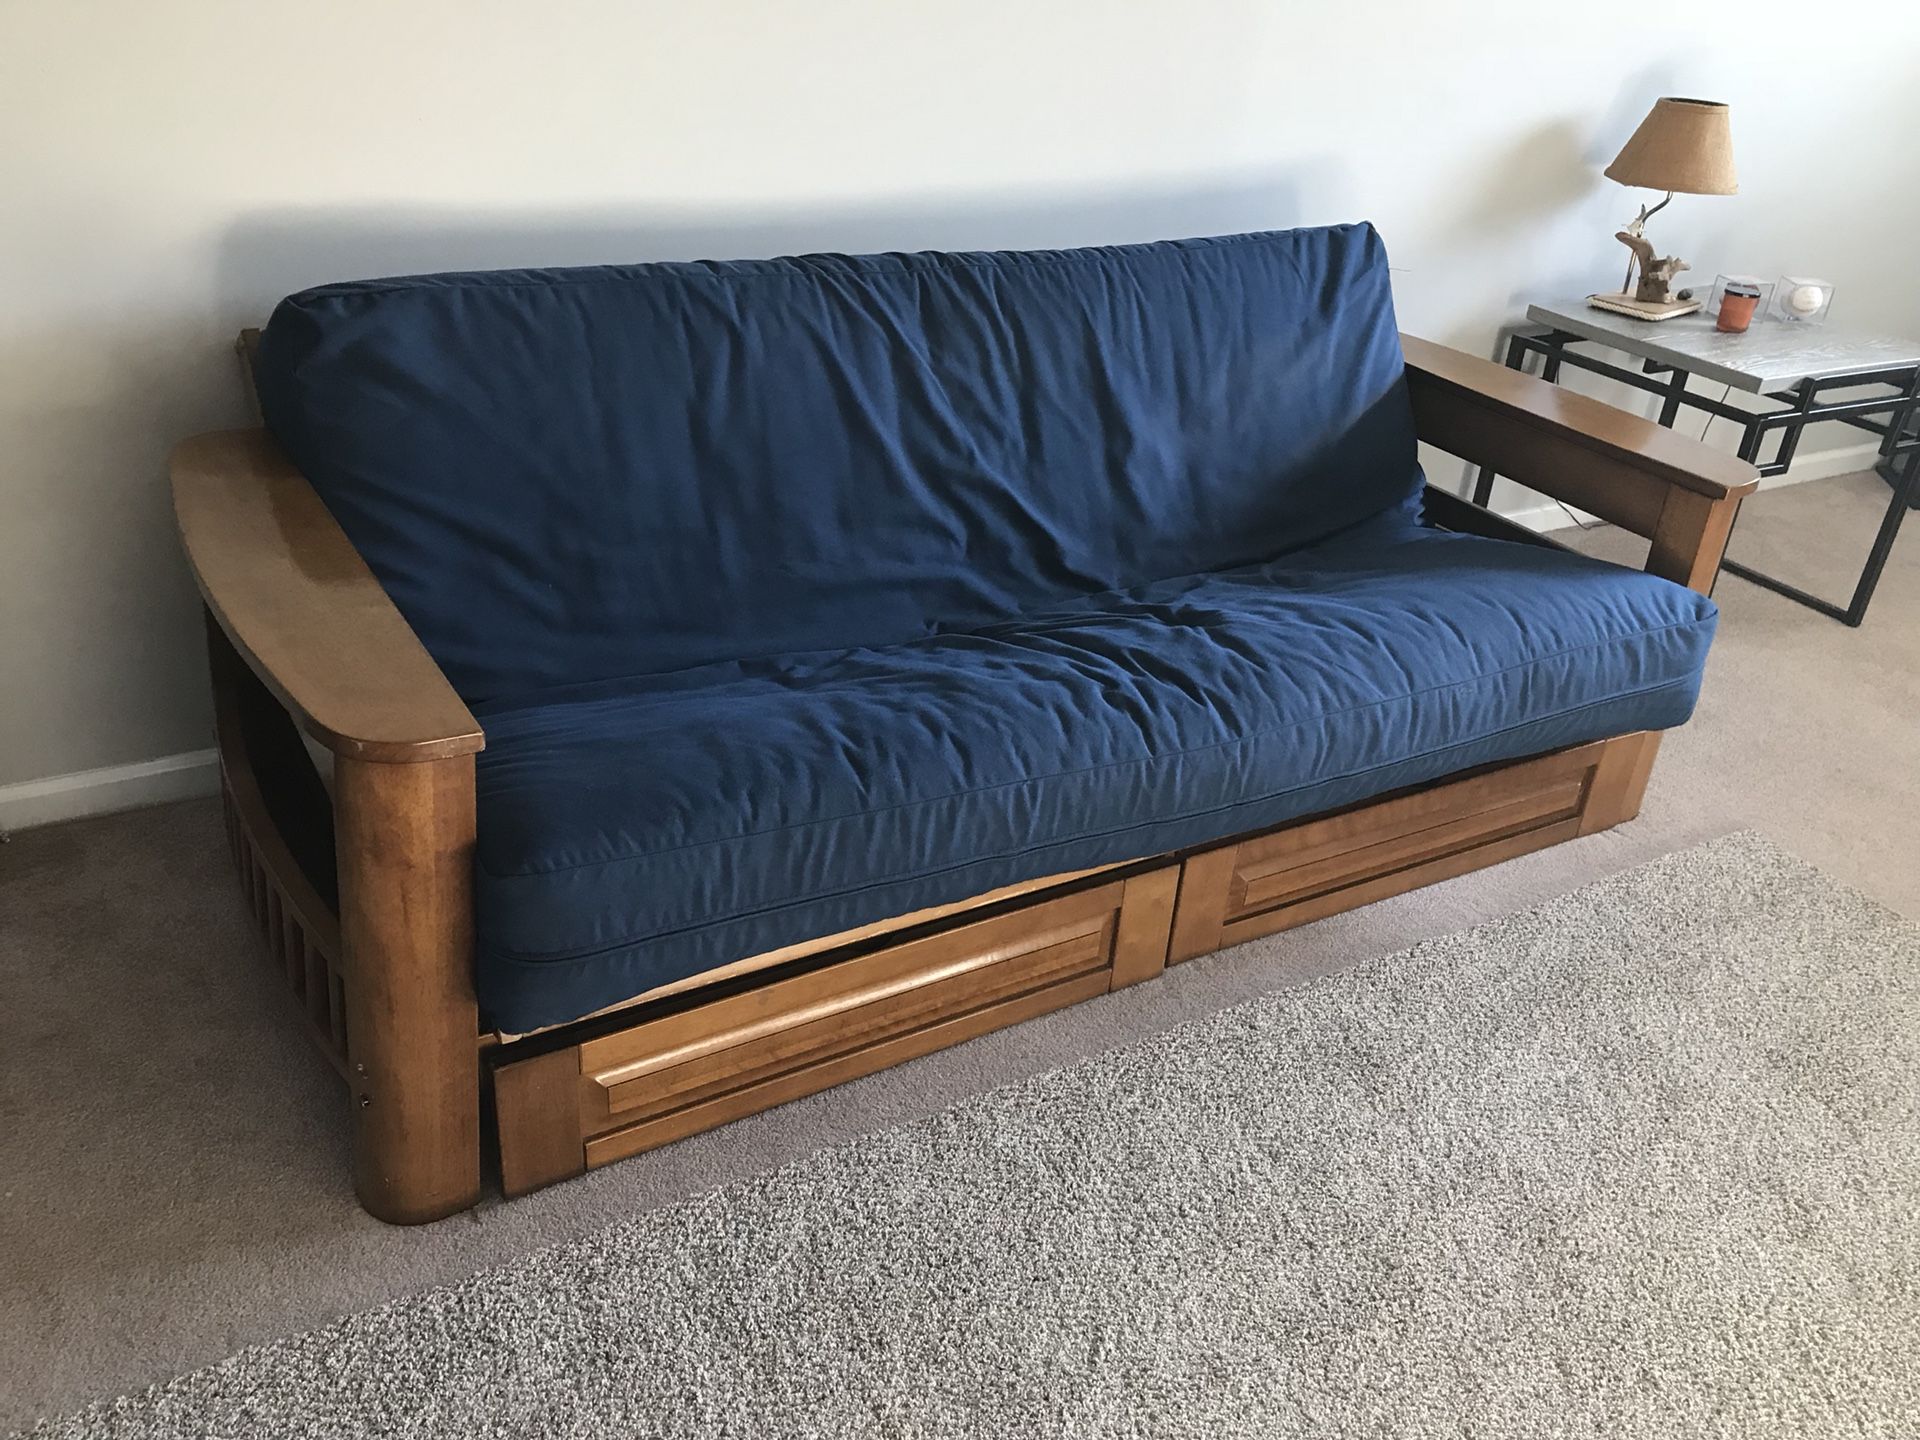 All wood frame futon. Just need cams and bolts.